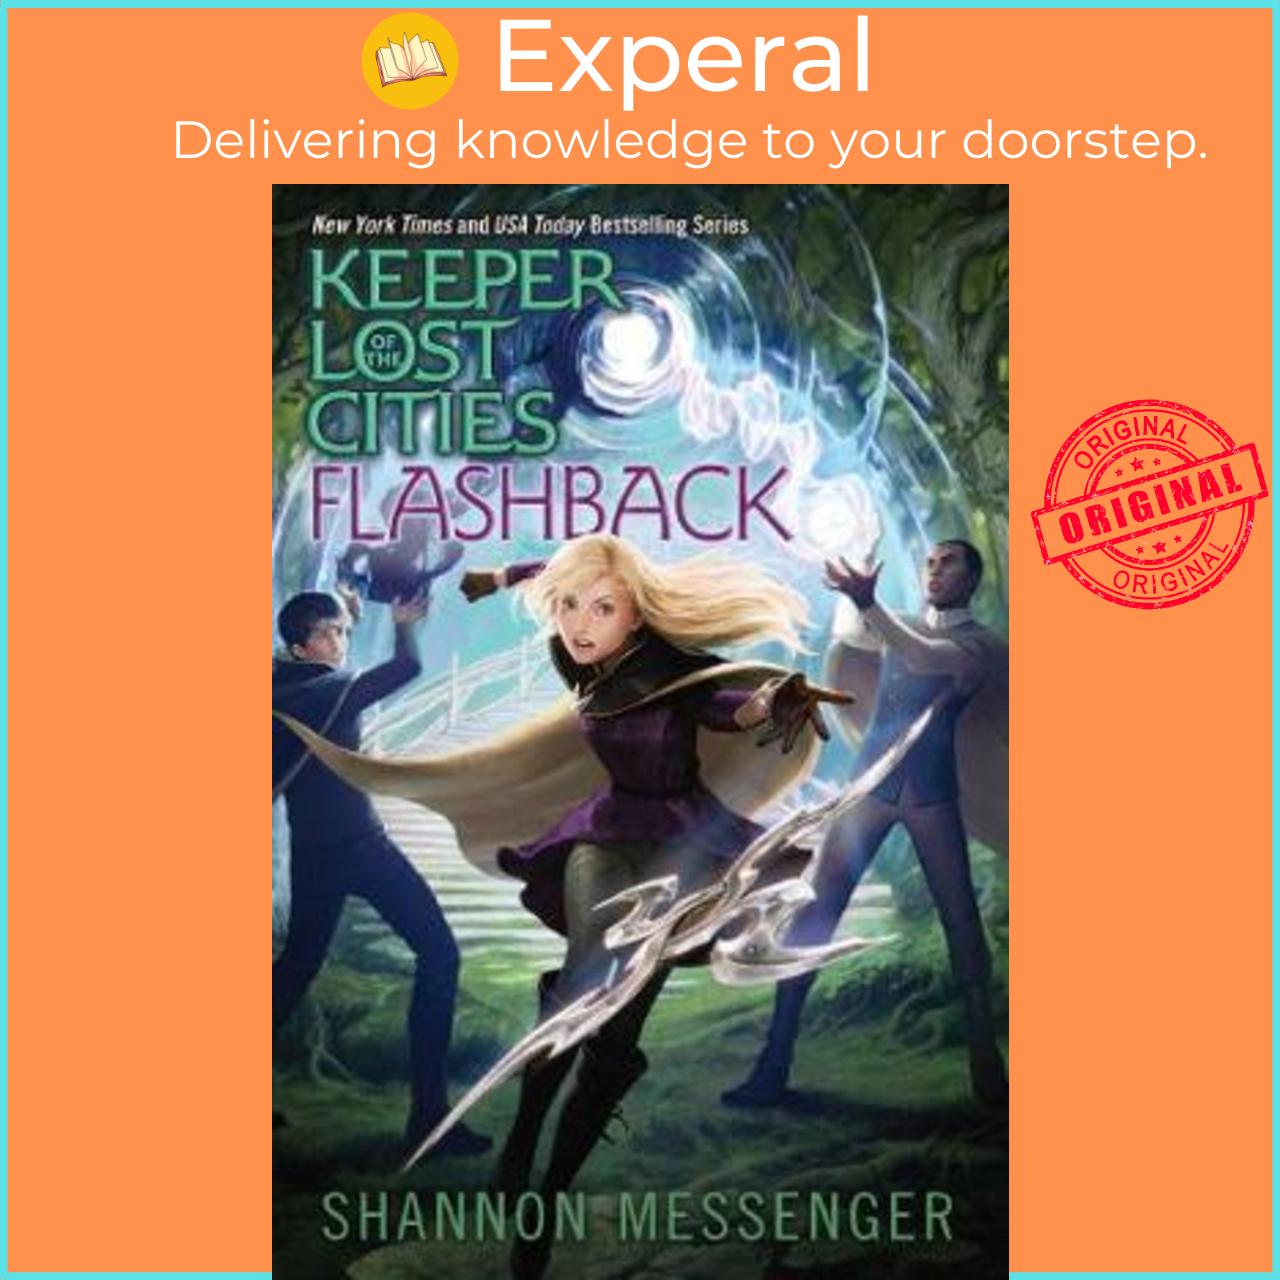 Sách - Flashback (7) (Keeper of the Lost Cities) by Shannon Messenger (US edition, paperback)